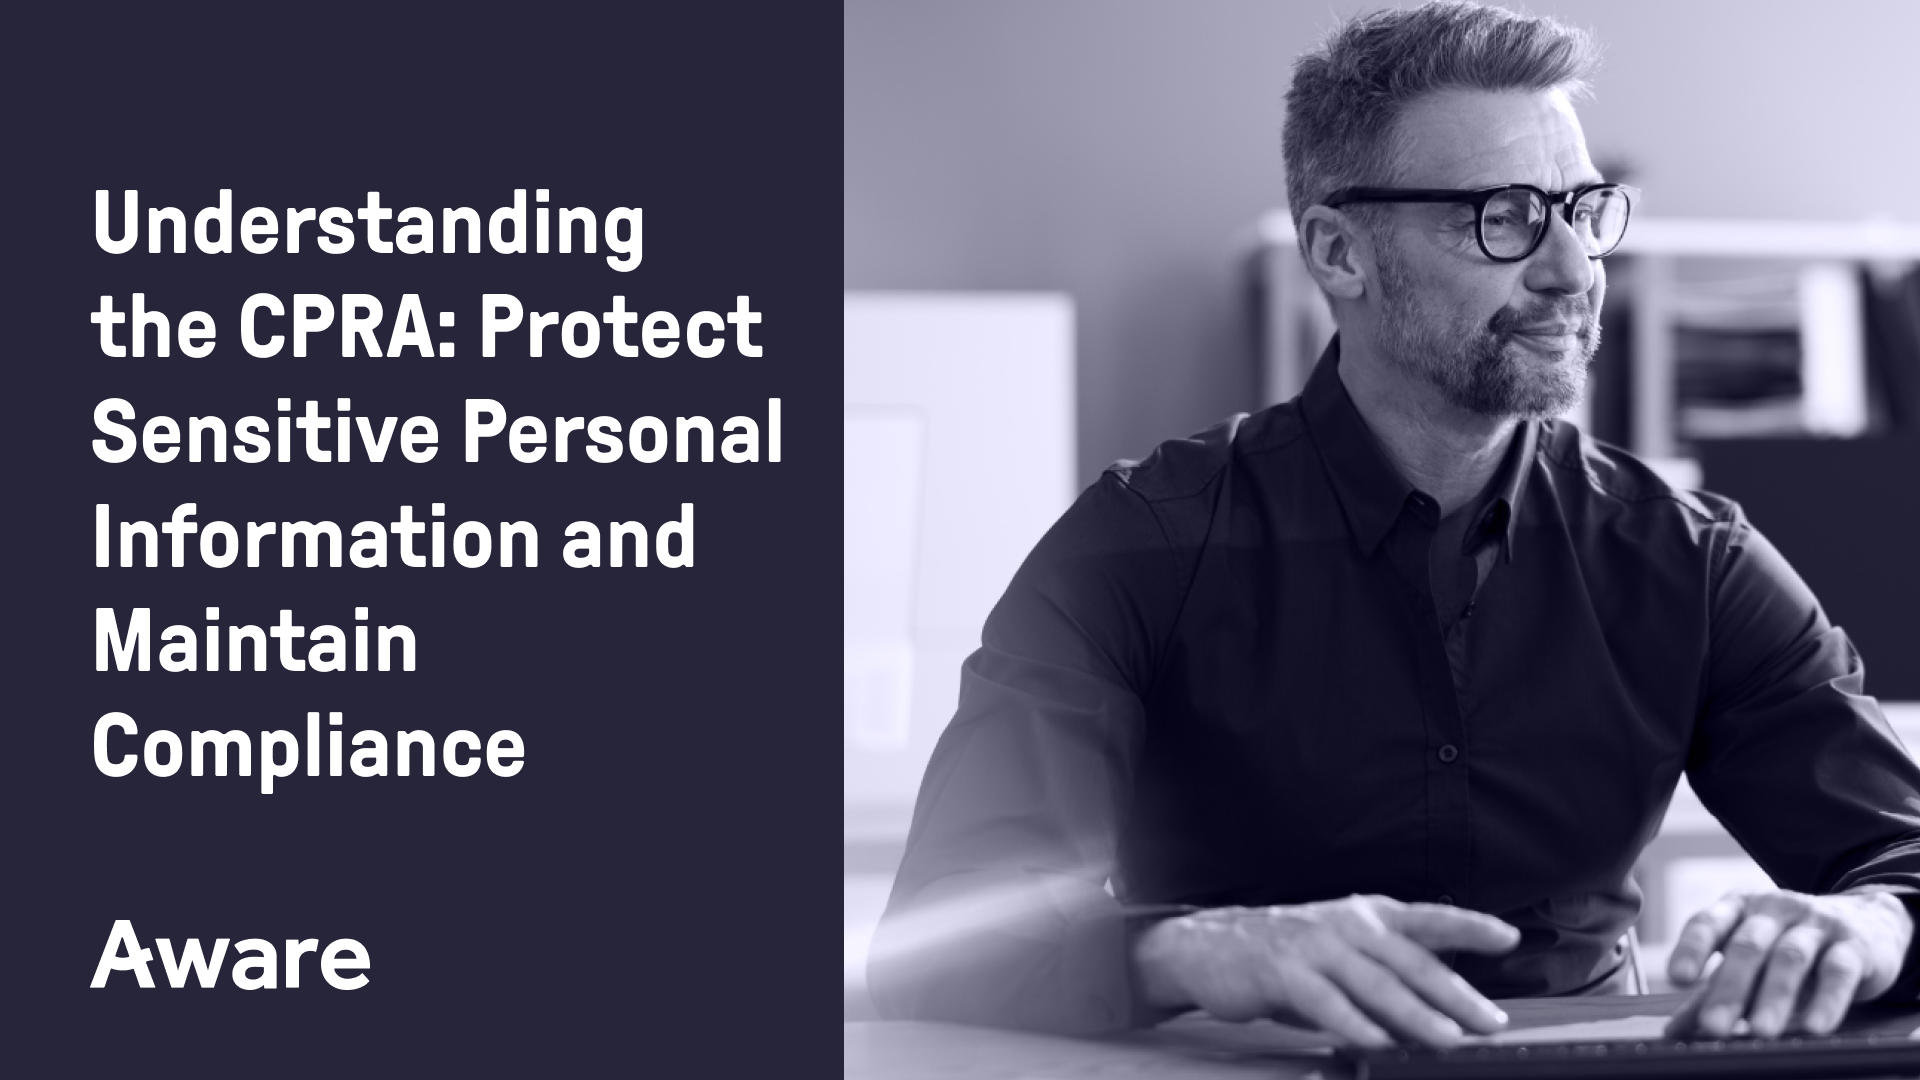 Understanding the CPRA: Protect Sensitive Personal Information and Maintain Compliance